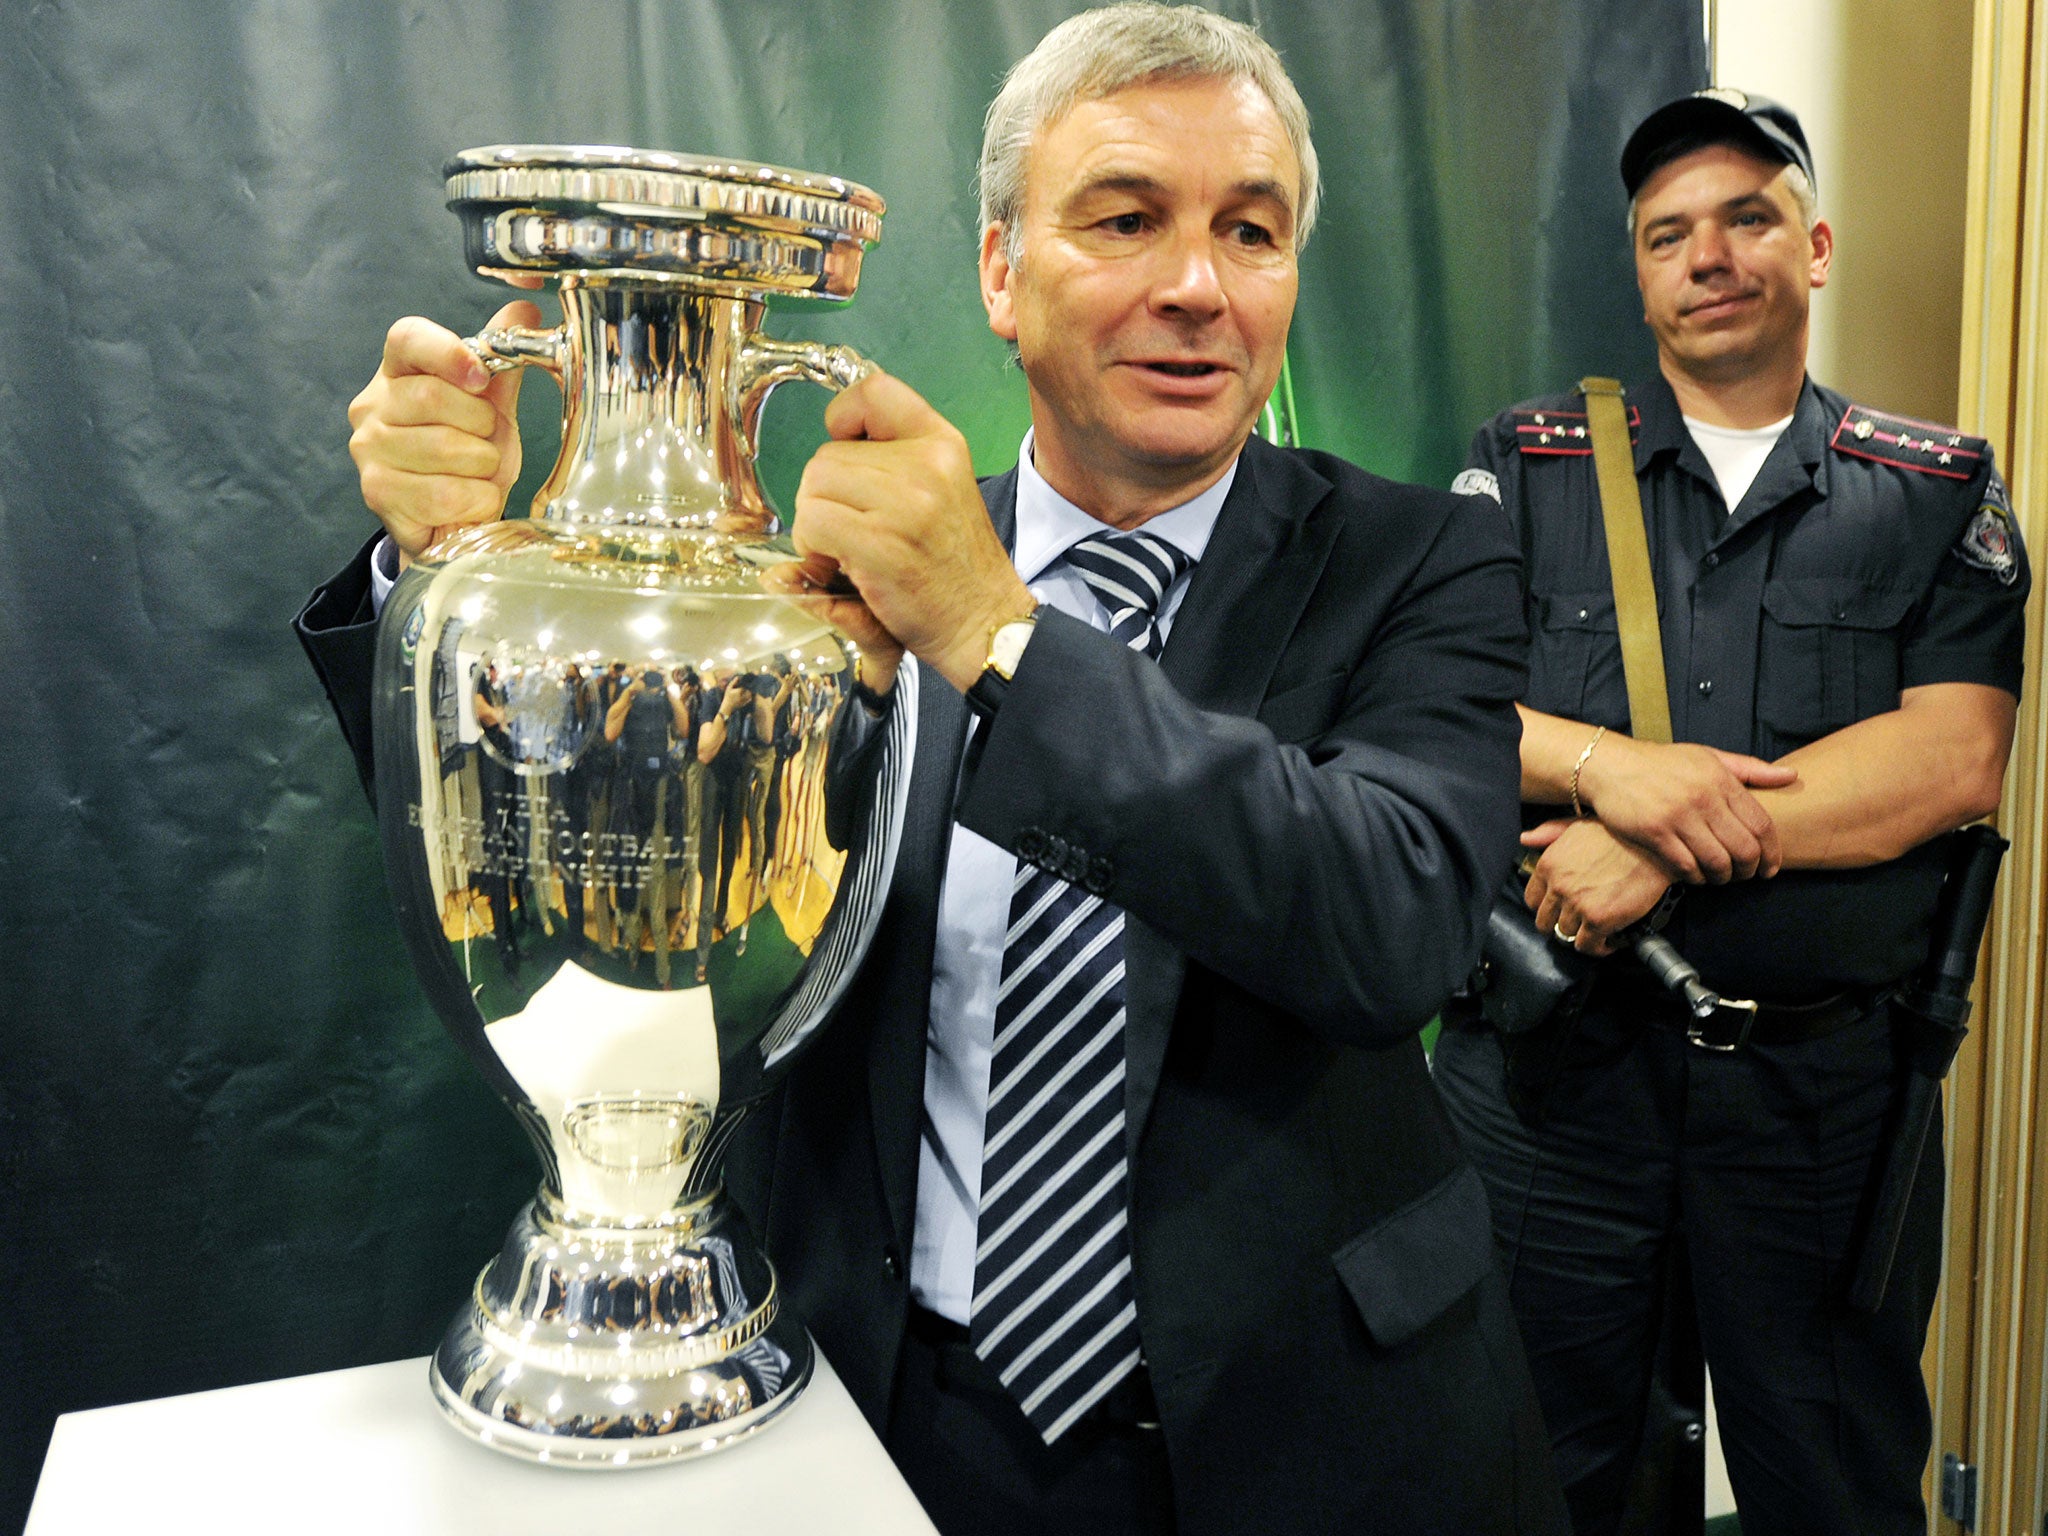 UEFA Events CEA Director David Taylor (L) holds up the UEFA Europen Championship Cup during its presentation in Kiev on July 20, 2011.